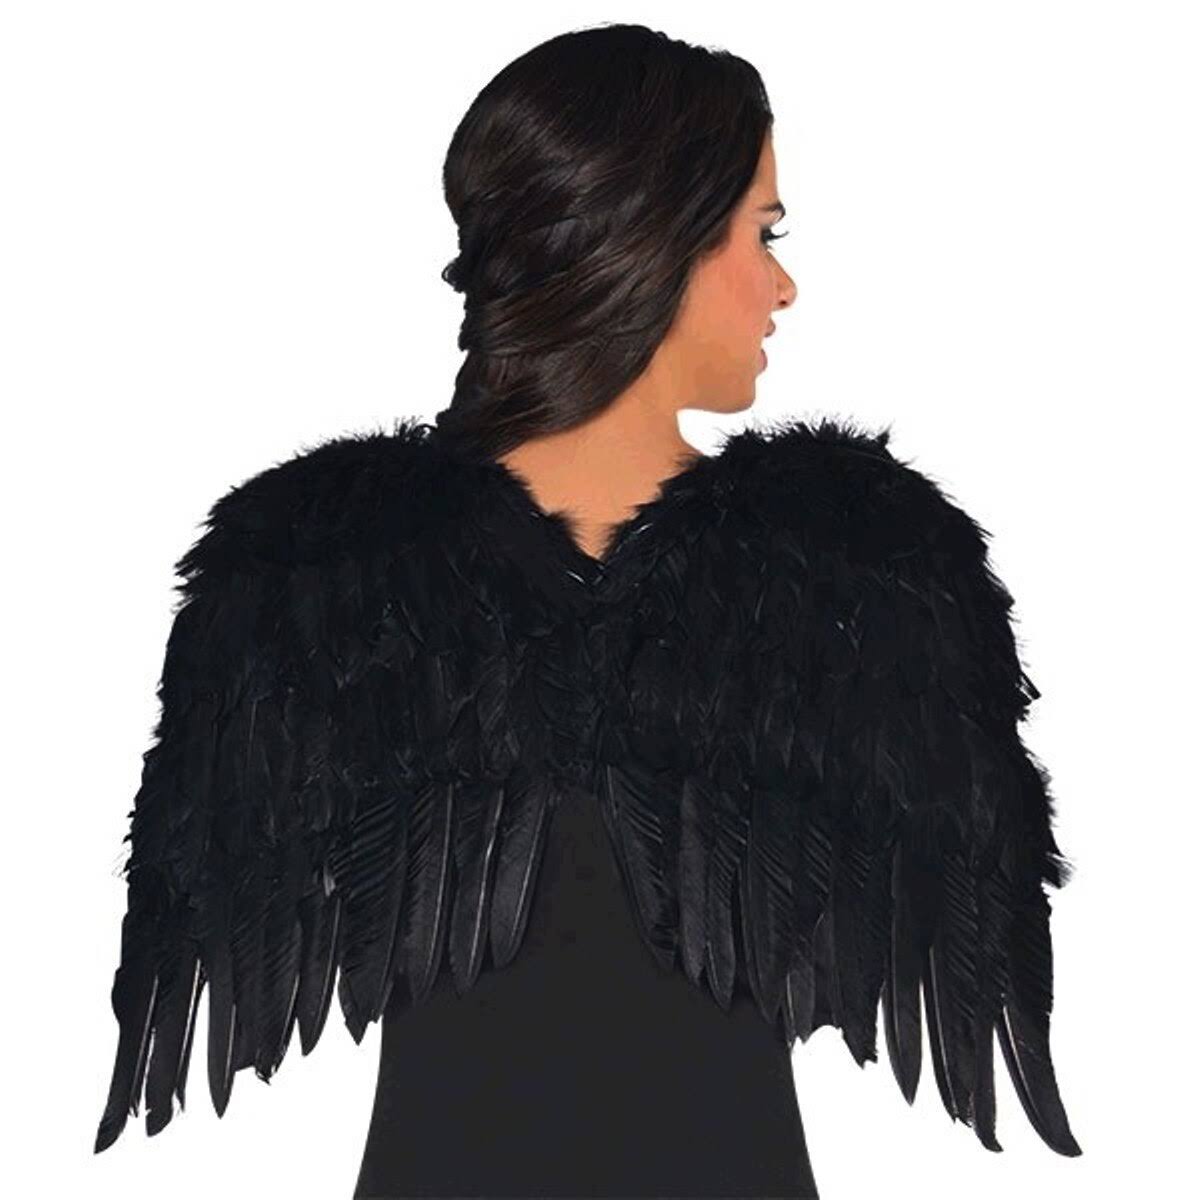 Black Feather Wings 60cm Dark Angel Costume | Party Decorations & Supplies